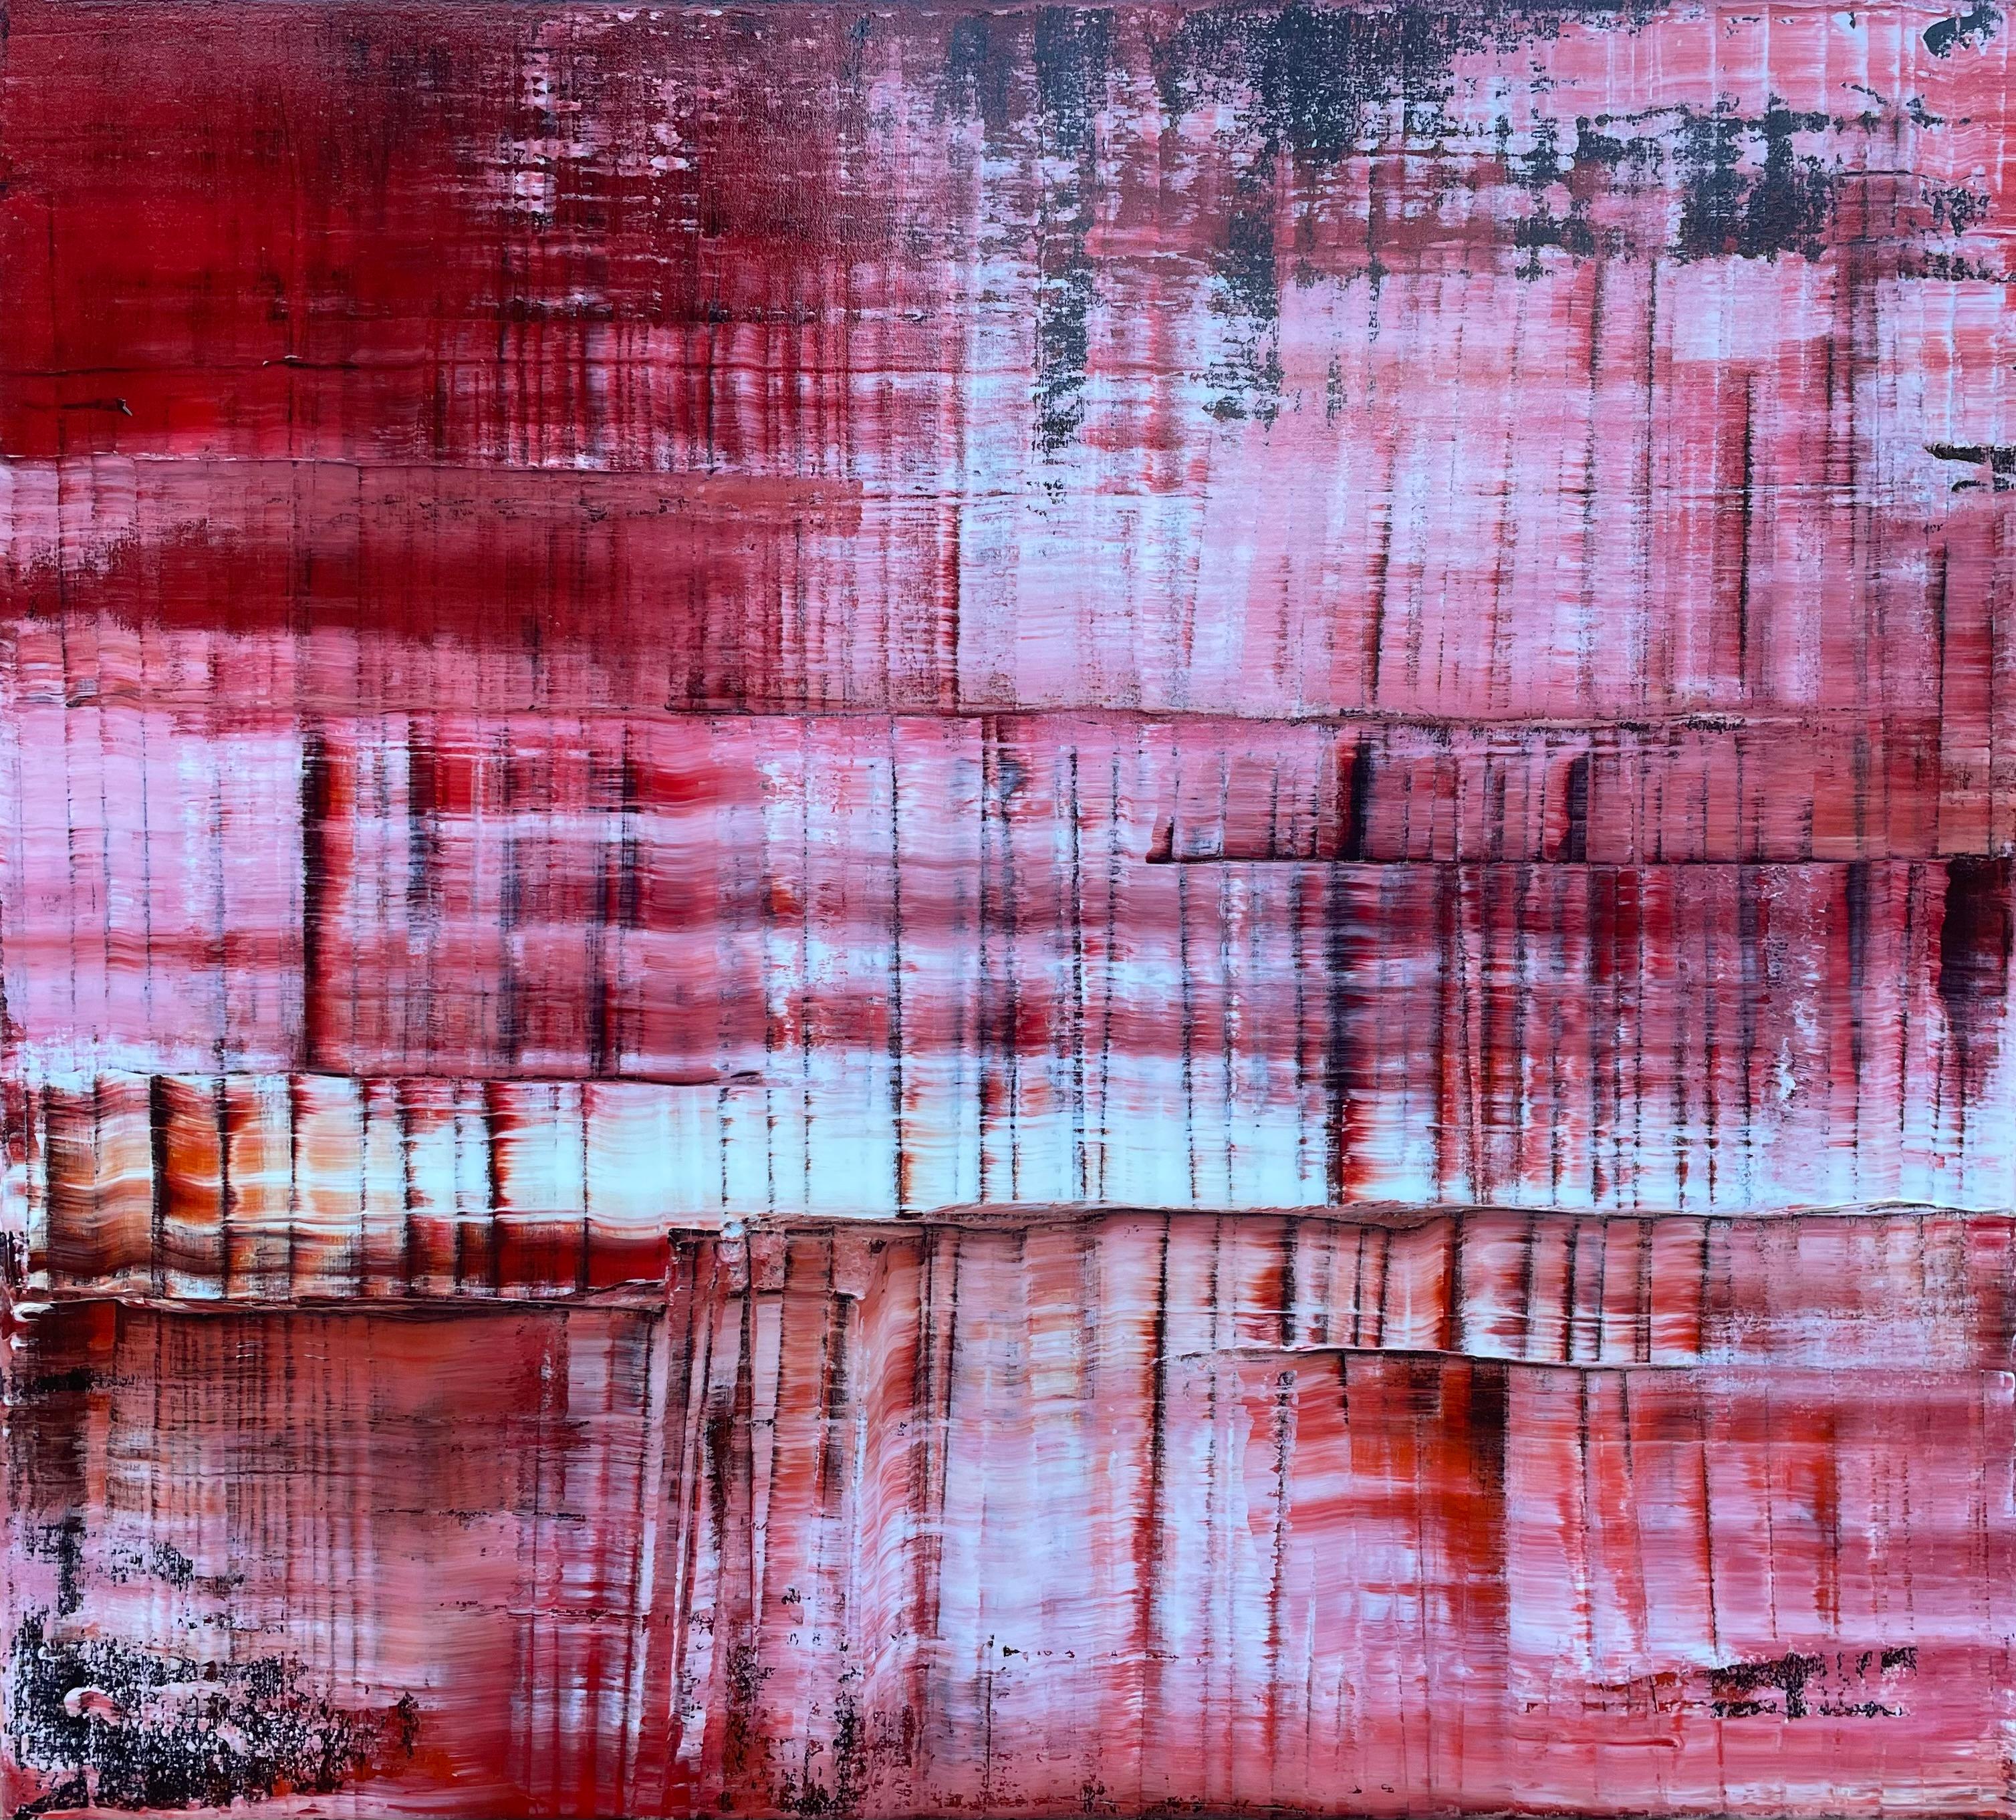 <p>Artist Comments<br>Artist Jason Astorquia displays a fiery abstraction of blazing red hues. The internal inferno reaches towards the external fires of creation and destruction in rich burnt oranges mixing with dark and light tones. Jason explores